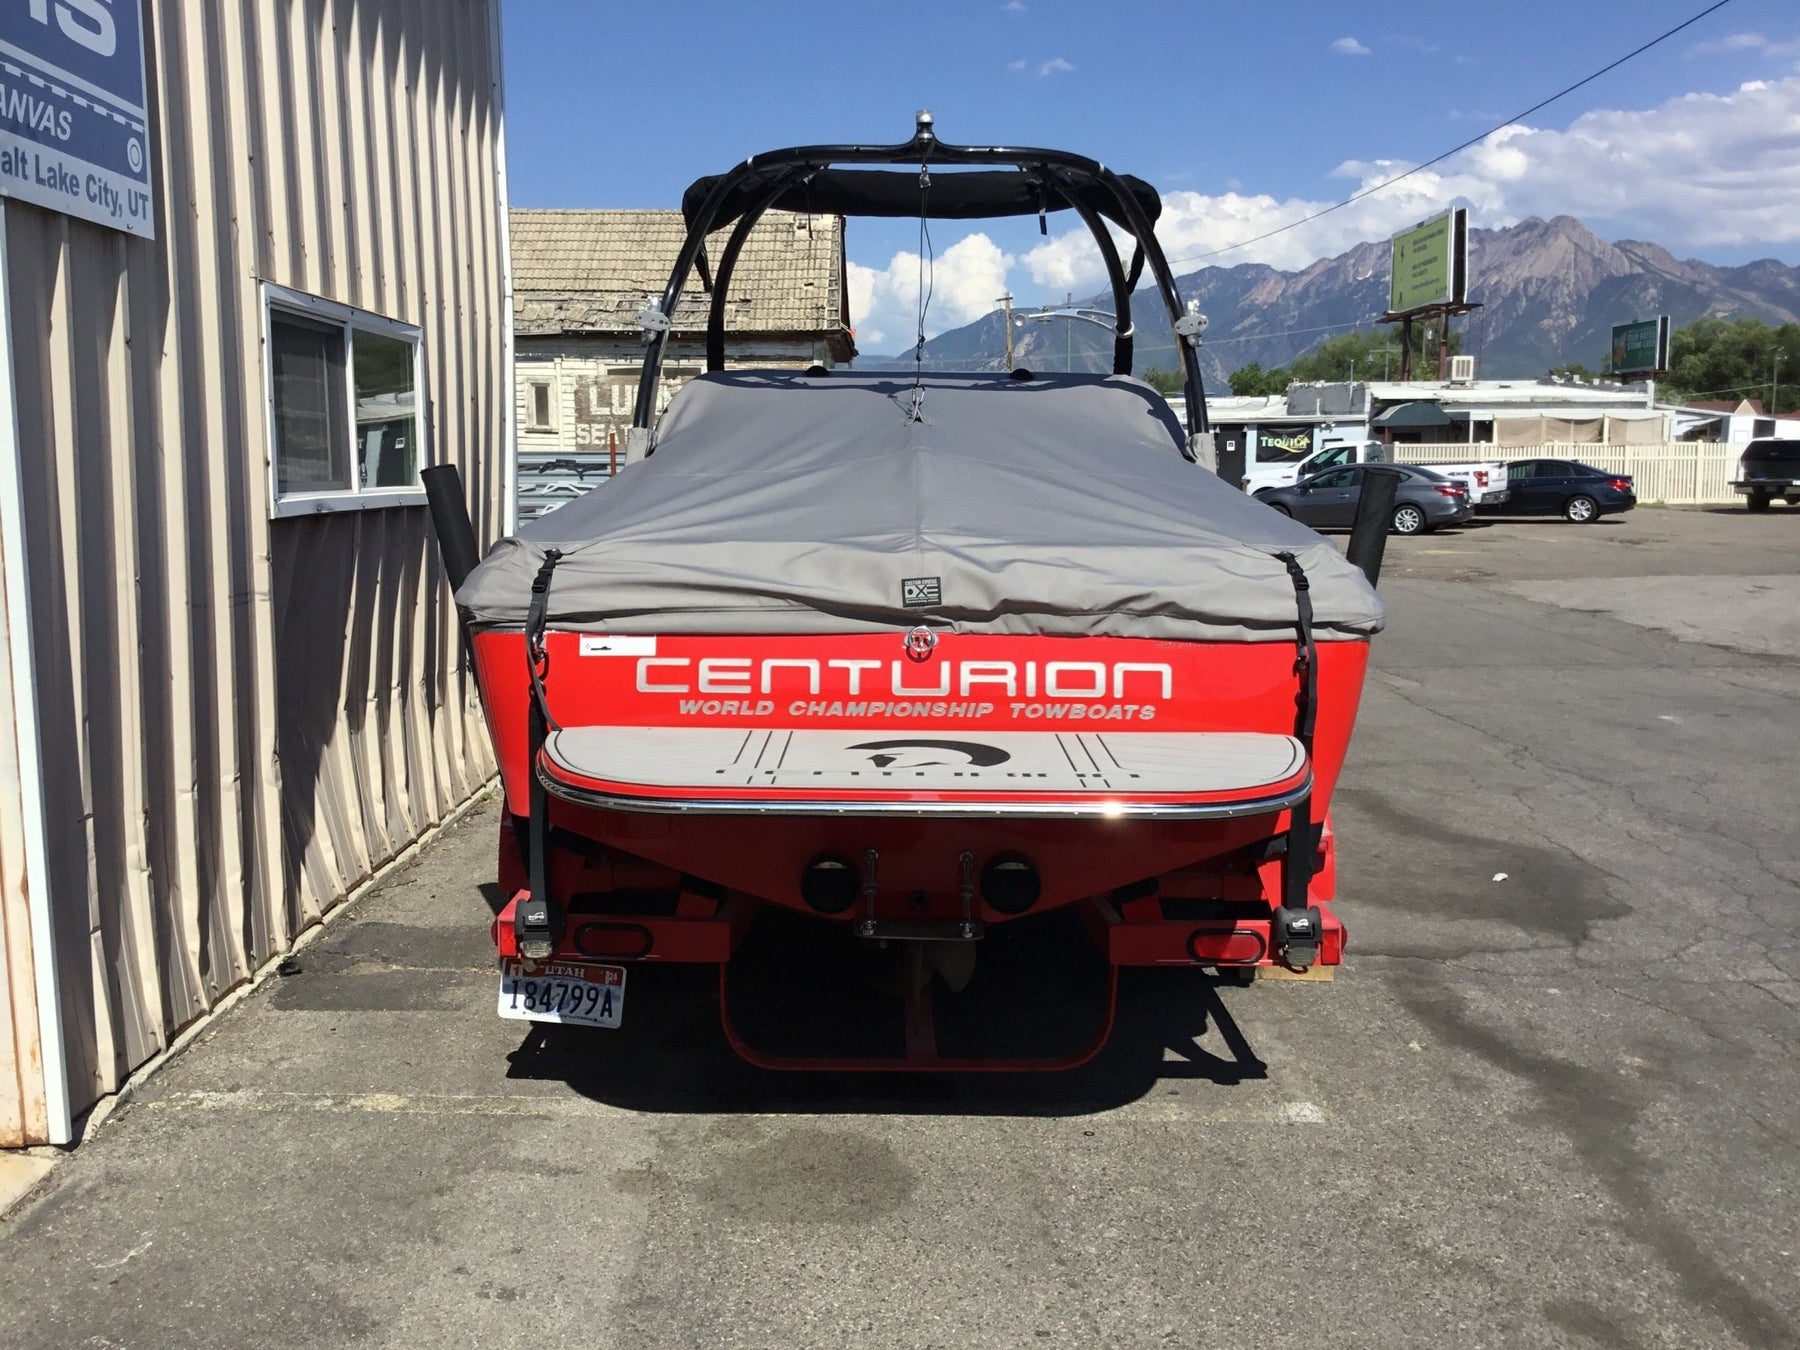 Centurion Avalanche with Evolution Tower Cinch Cover - BoardCo